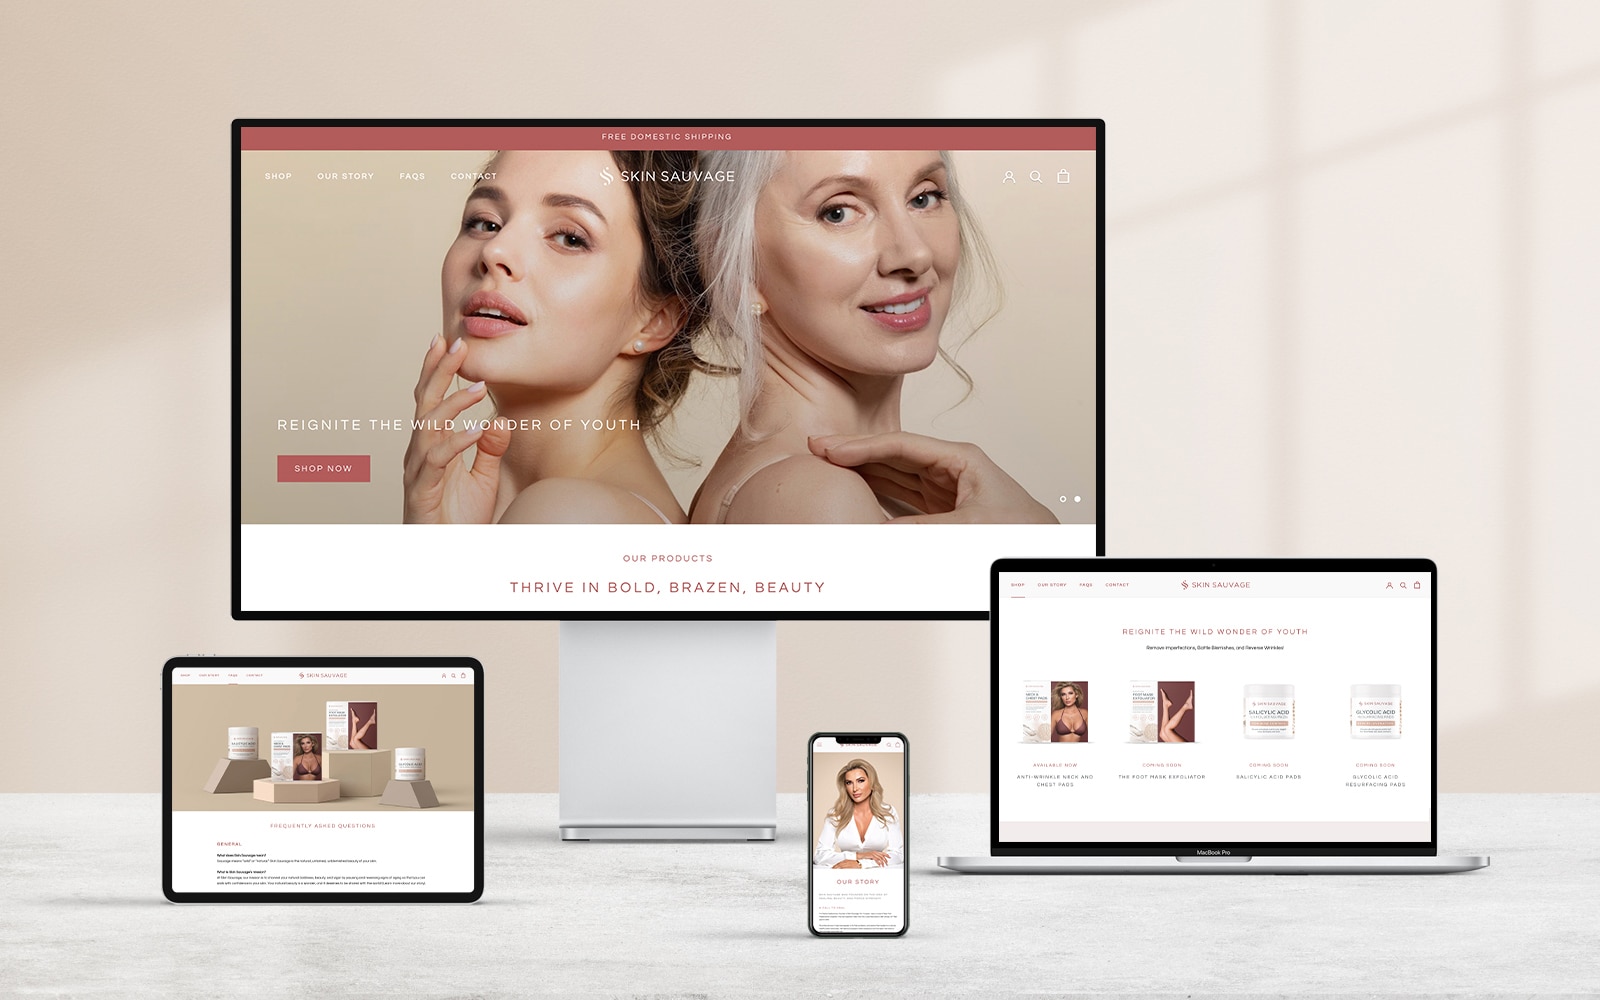 Skin Sauvage skin care packaging website designs in various devices.